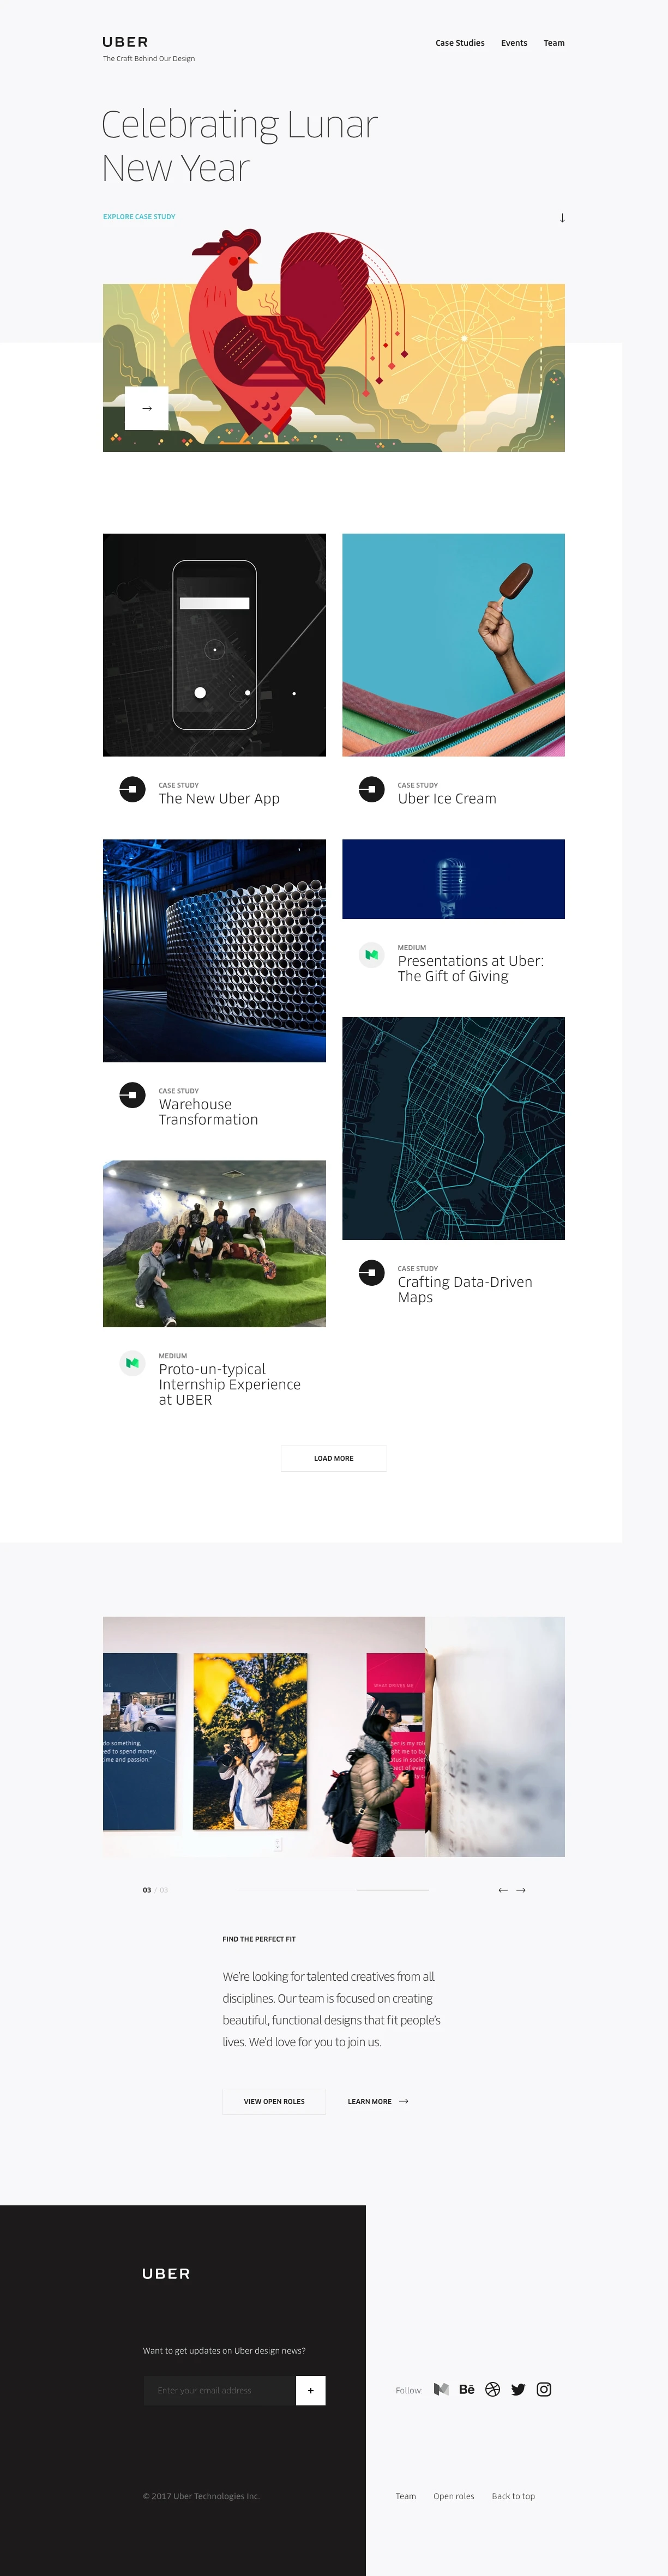 Uber Design Landing Page Example: At Uber, we’re passionate about art and design. Are you? Check out open art and design positions.